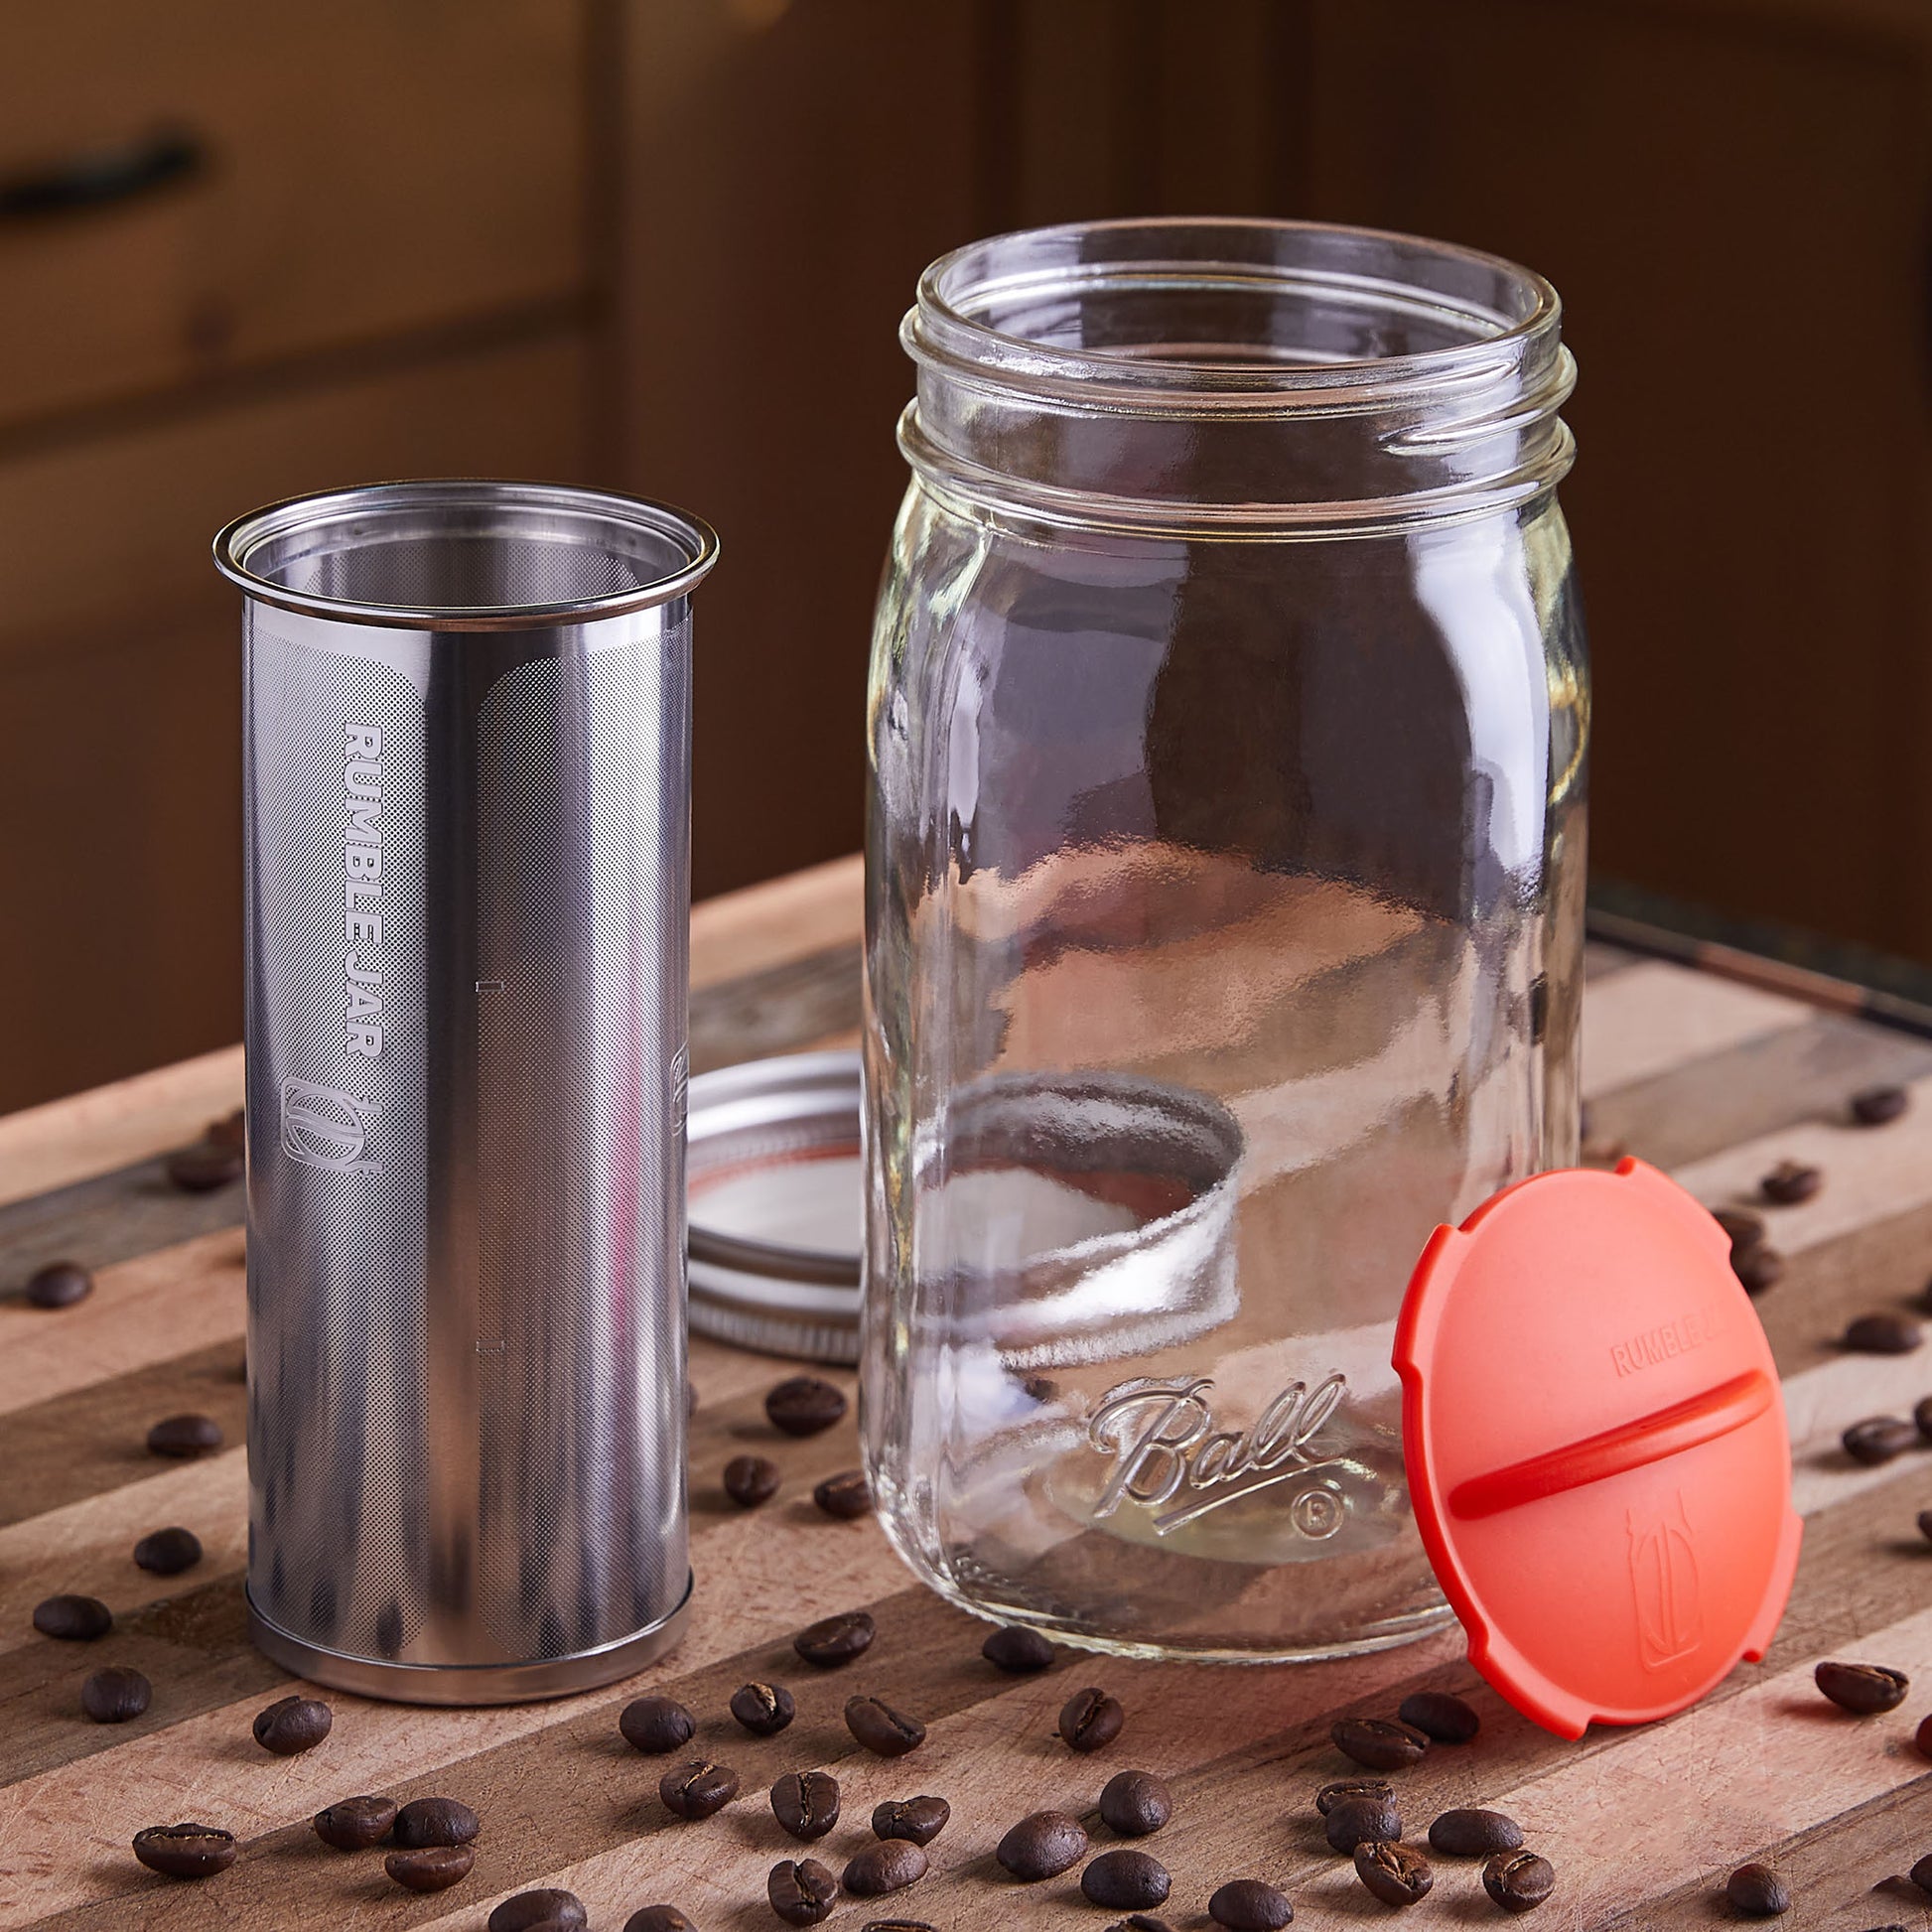 Cold Brew Coffee Maker Kit: Wide Mouth Mason Jar with Screw Top